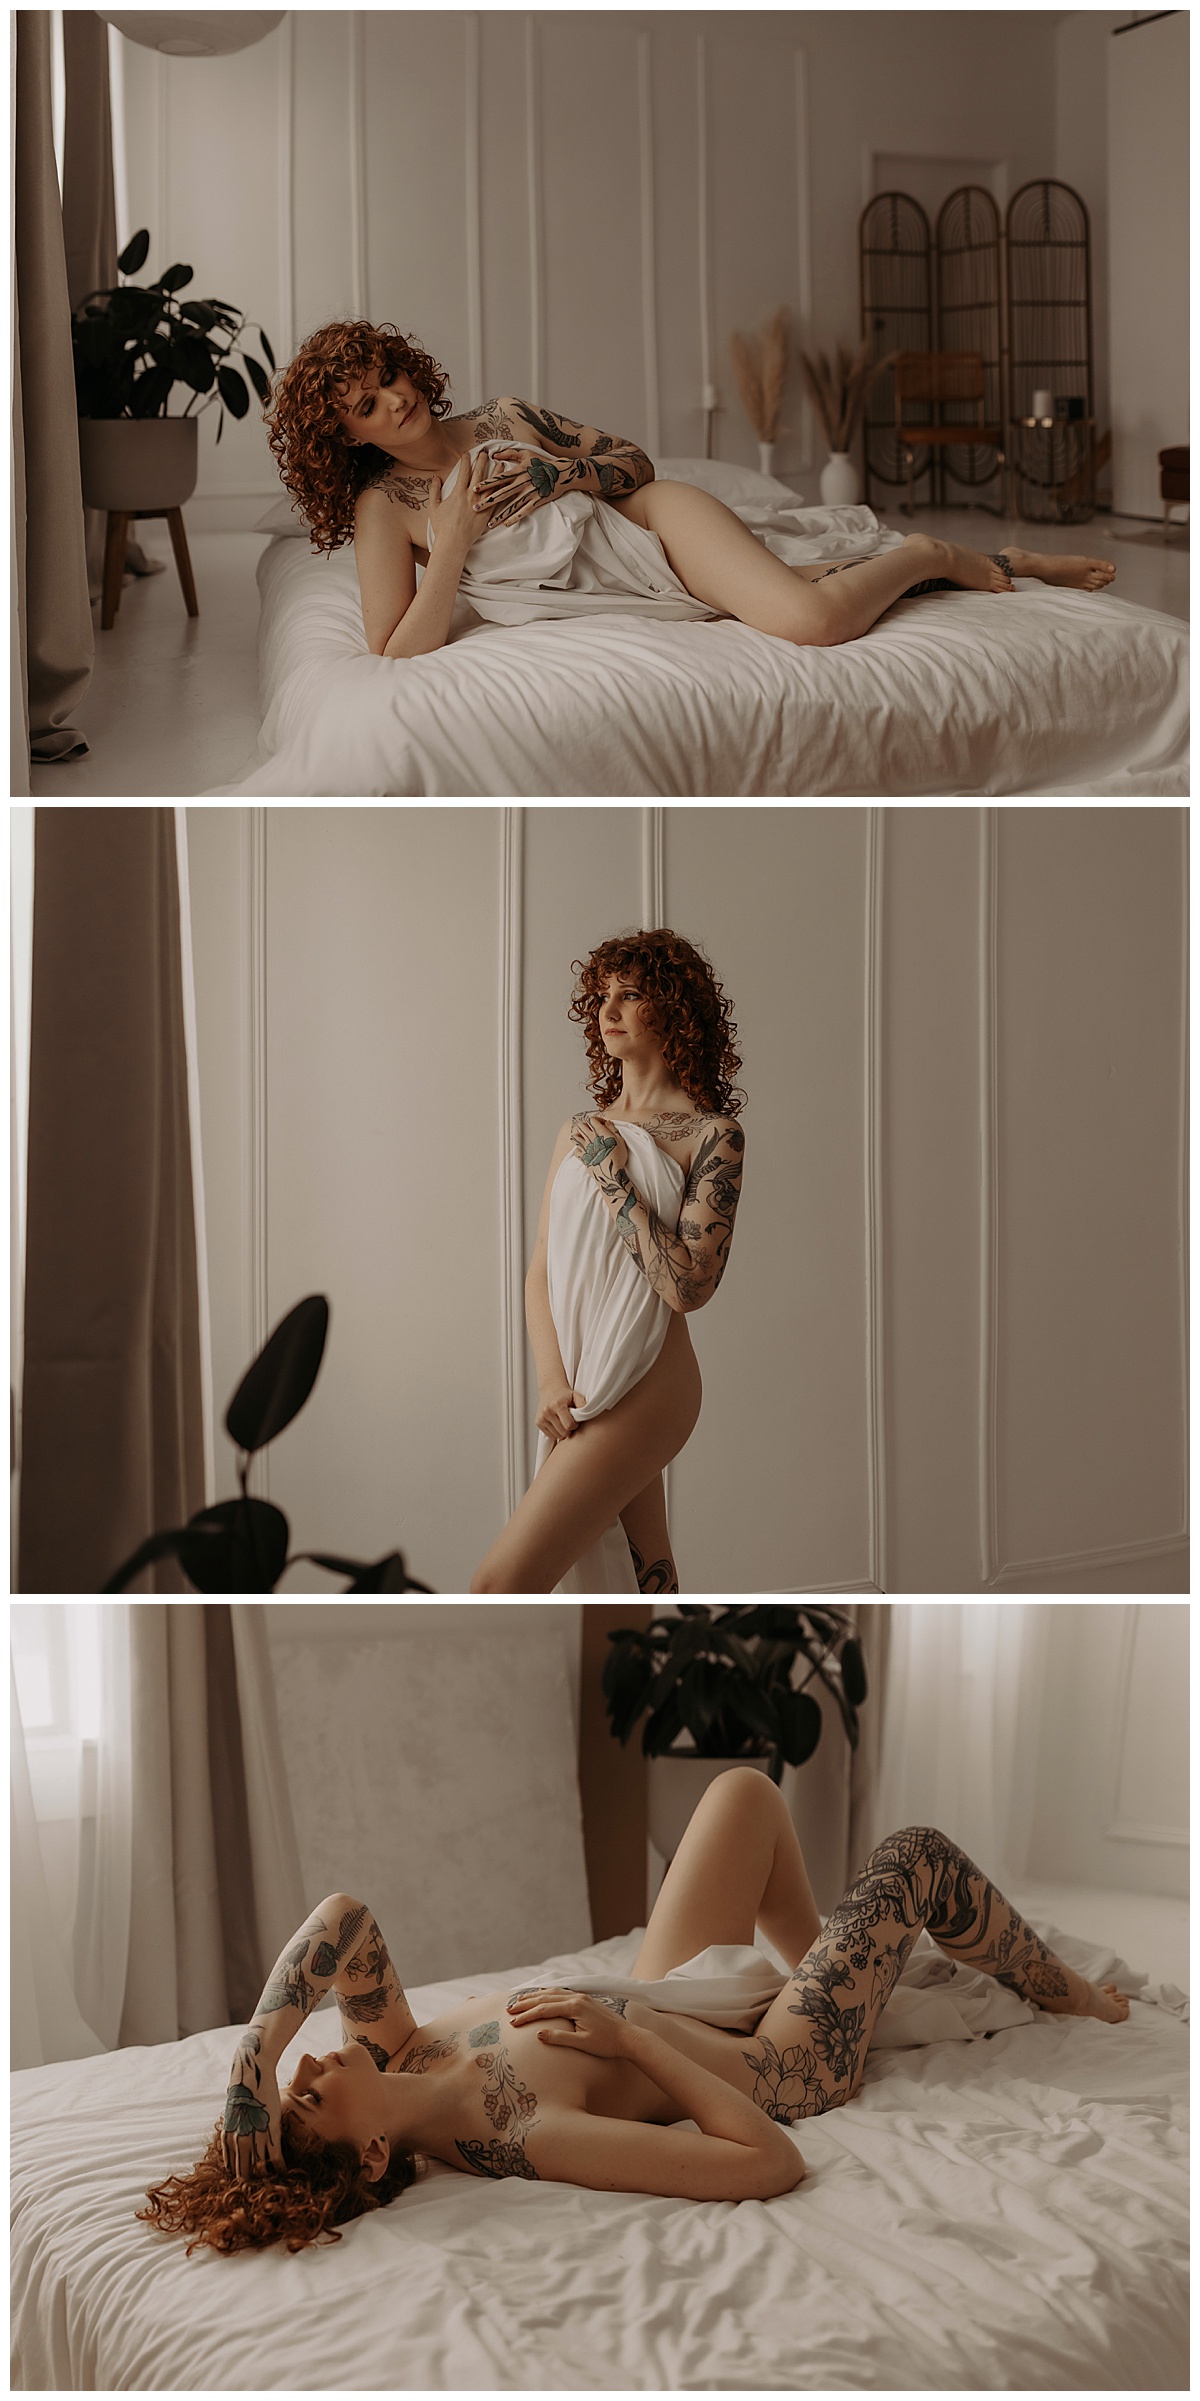 Adult covers her body with white sheet for Mary Castillo Photography